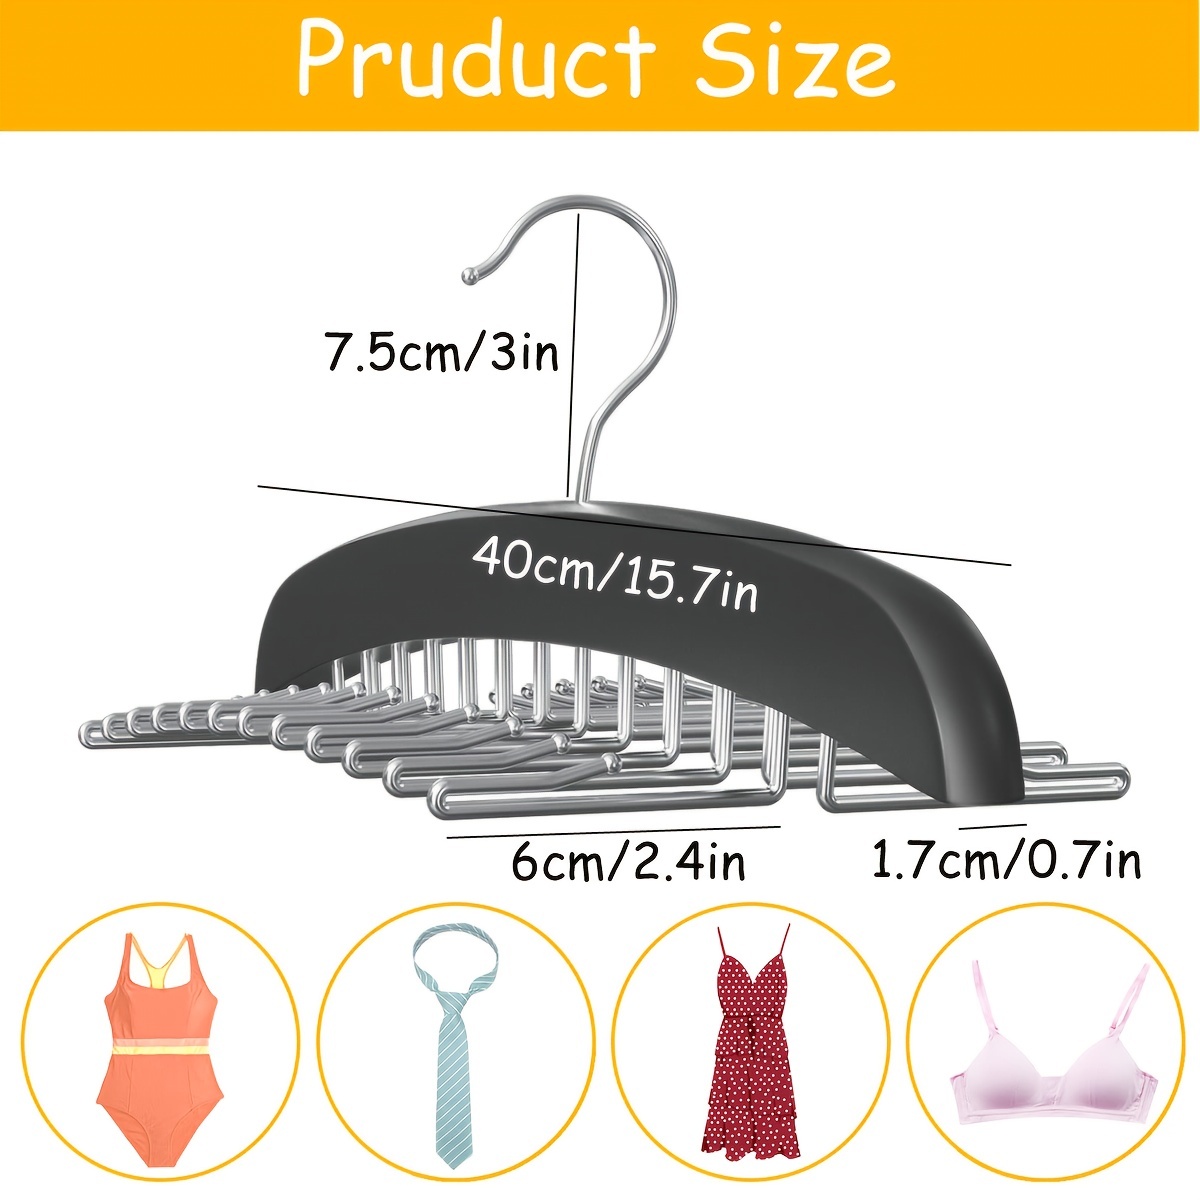  Fitnice Tie Rack Hanger for Closet, Bra Hangers with 24  Foldable Metal Hooks, Tank Top Hanger Space Saving Non-Slip Closet  Organizer and Storage for Camisoles Tank Tops Bras Belts Ties Scarves